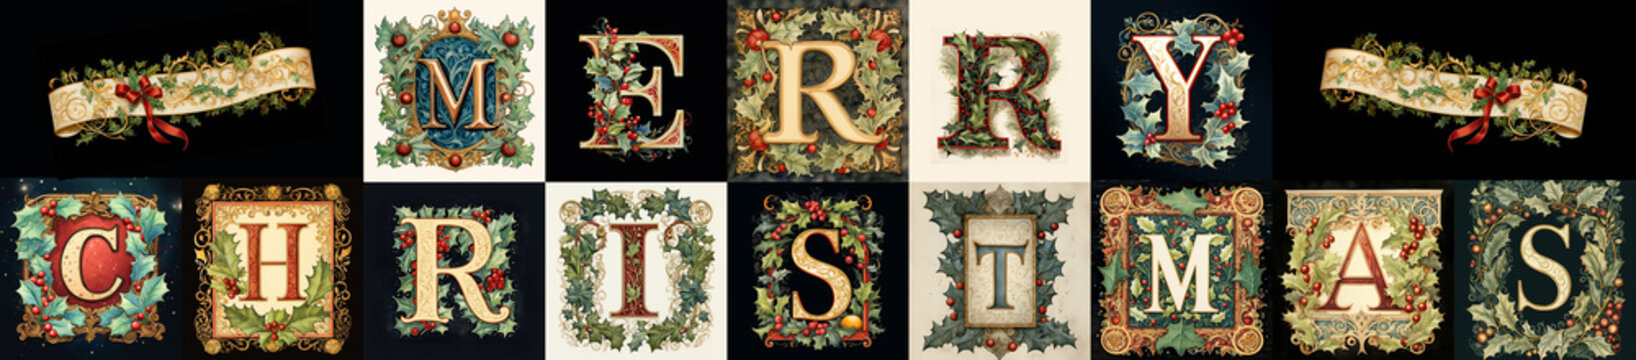 merry christmas wide banner with capital letters in the style of an illuminated manuscript. festive 